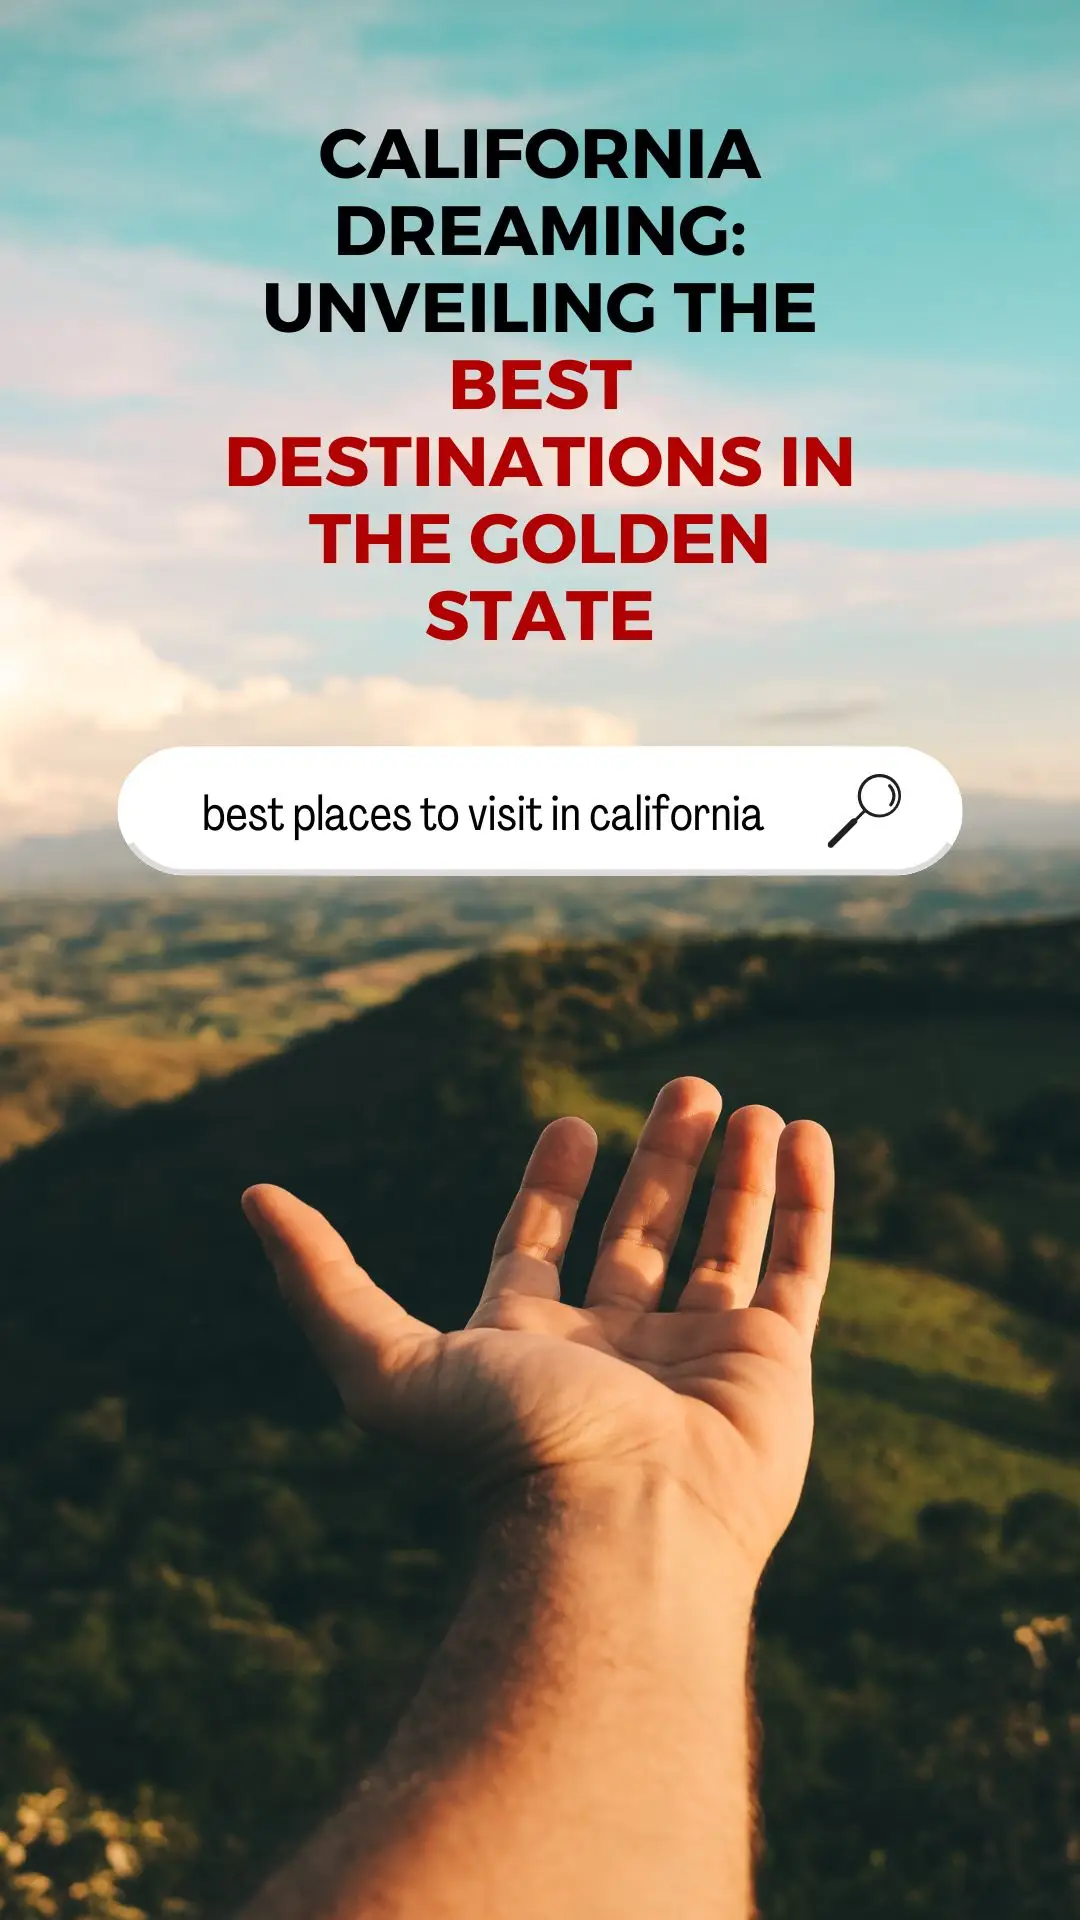 best places to visit in california California Dreaming: Unveiling the Best Destinations in the Golden State